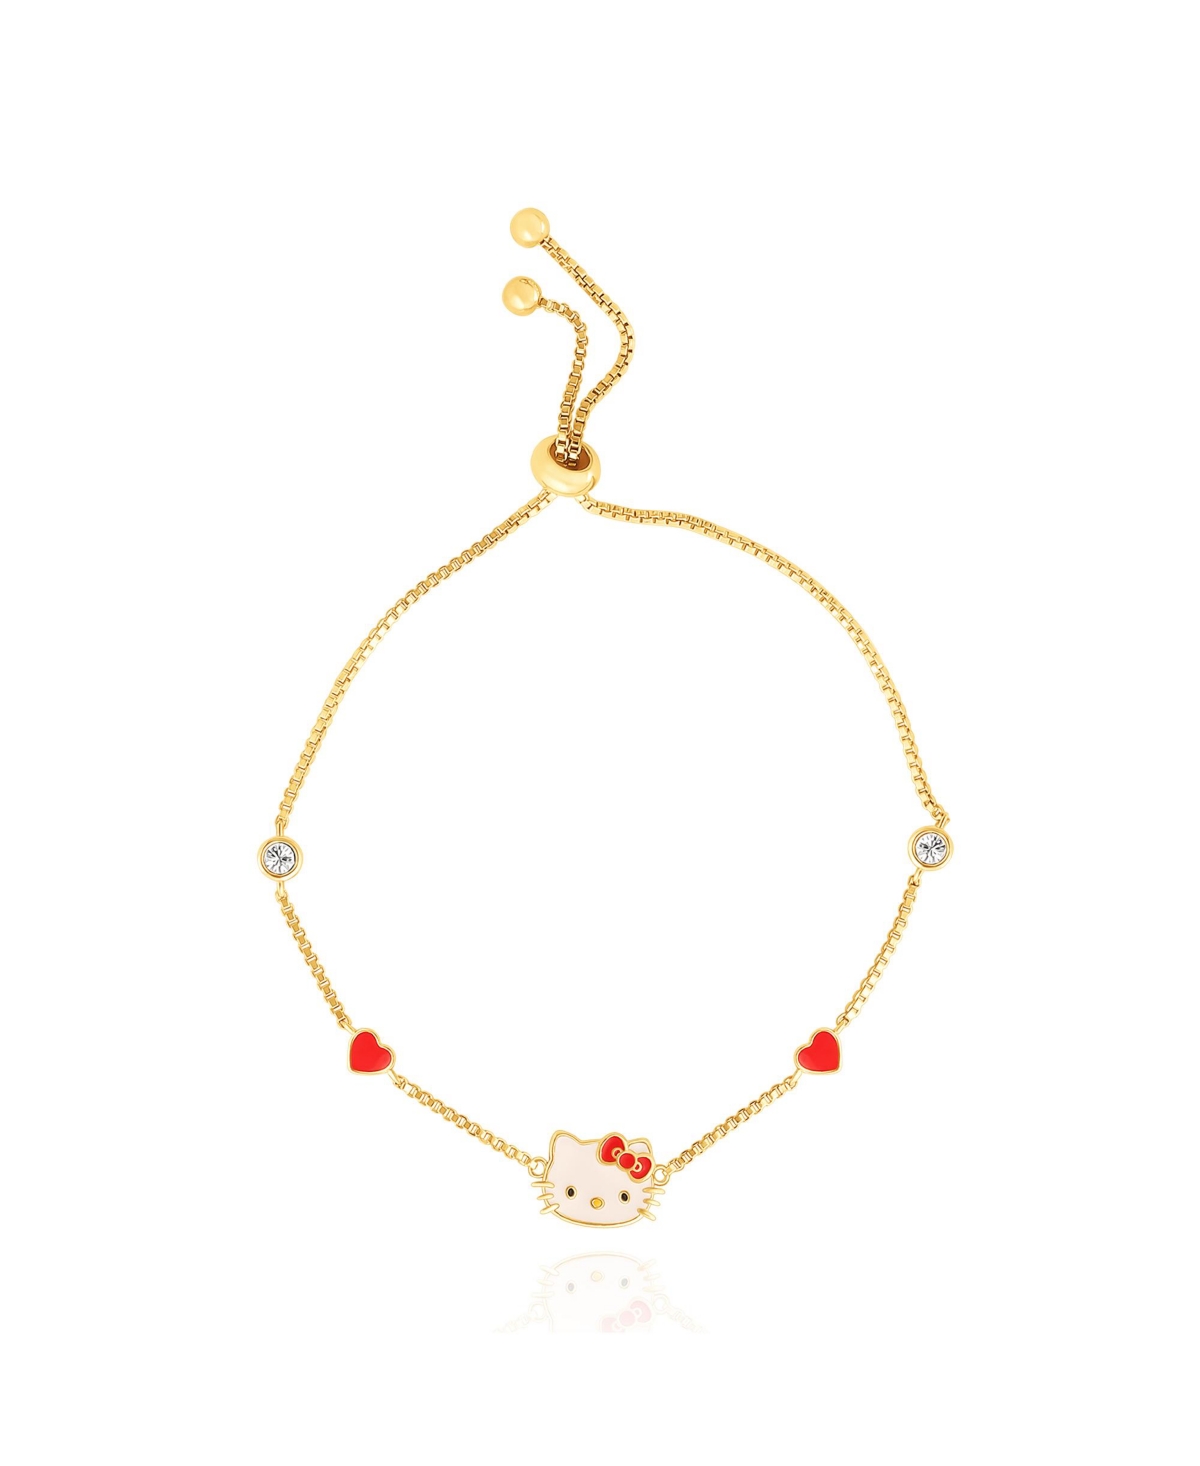 Sanrio Flash Yellow Gold Plated Station Heart and Crystal Bracelet - Gold tone, red